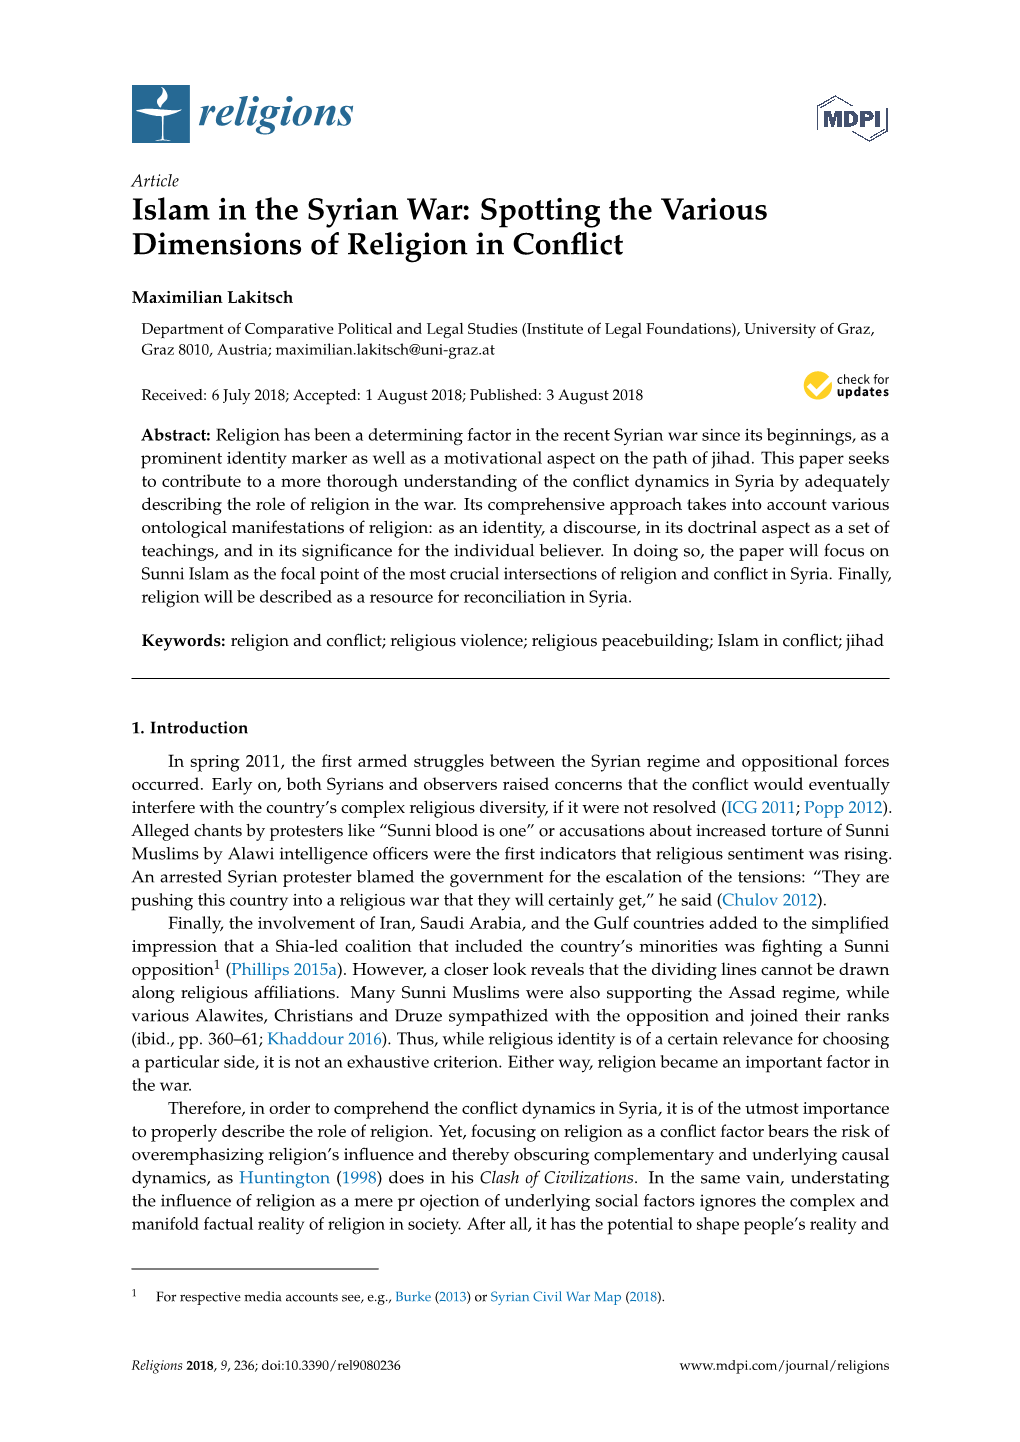 Islam in the Syrian War: Spotting the Various Dimensions of Religion in Conﬂict